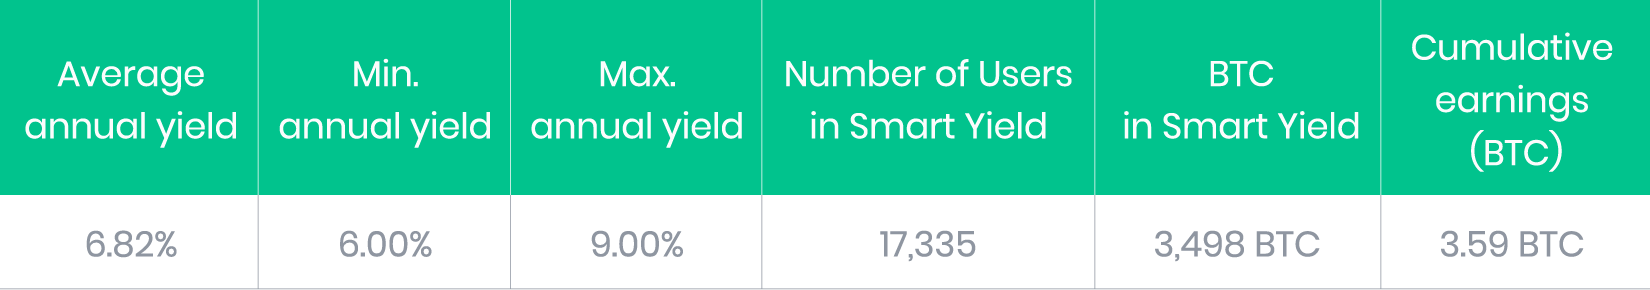 BTC Smart Yield May Results